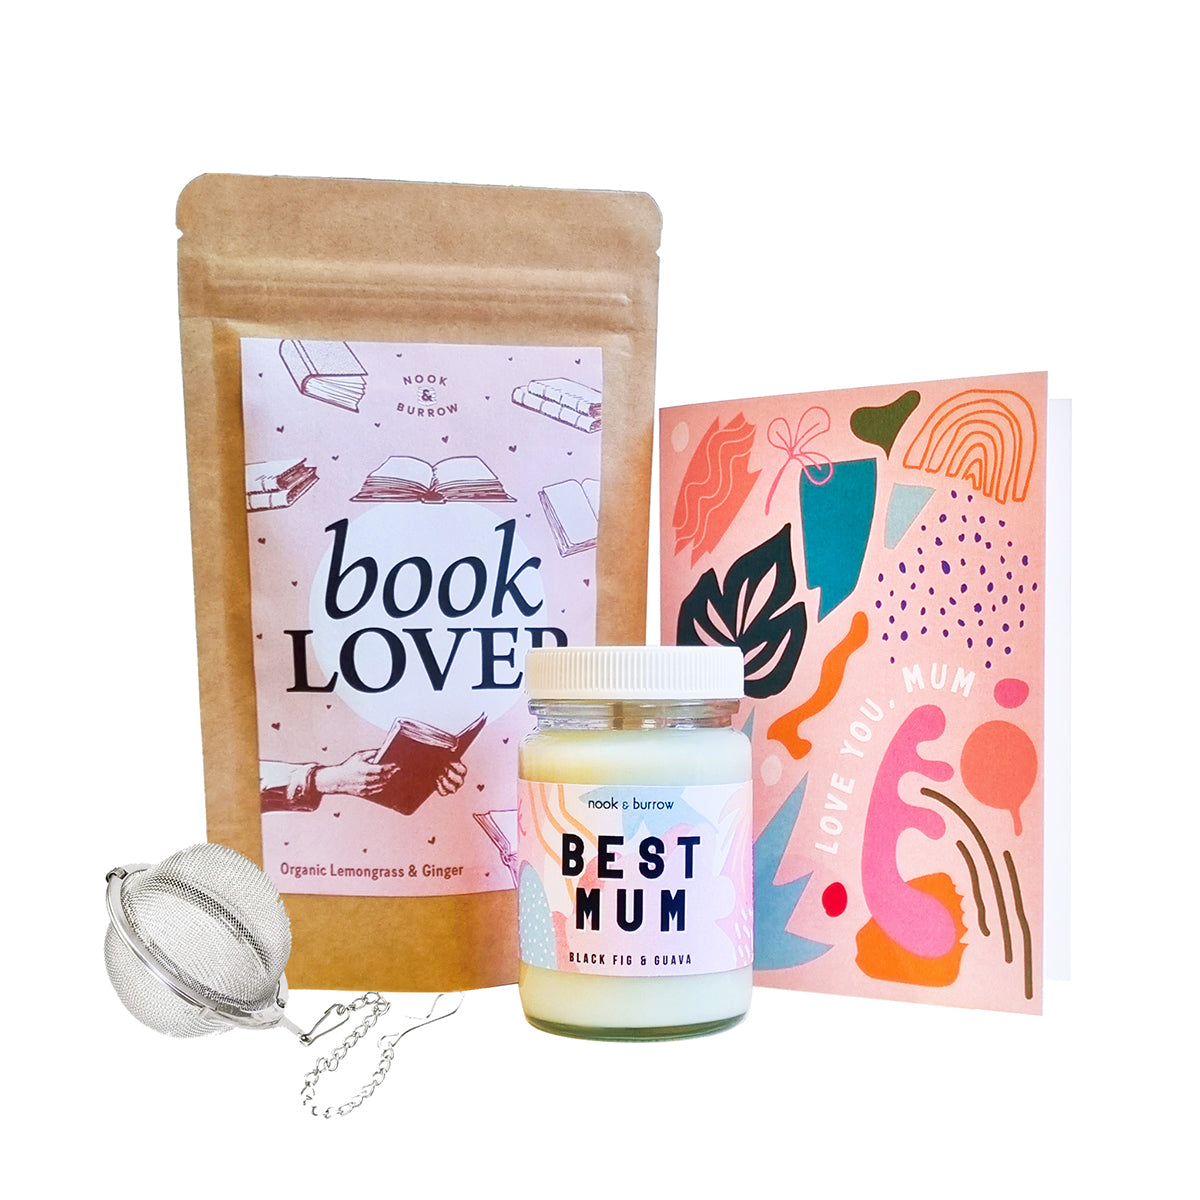 Best Mum Gift Box with a pack of loose leaf tea, tea strainer, best mum candle and designed greeting card that says 'Love you, Mum'